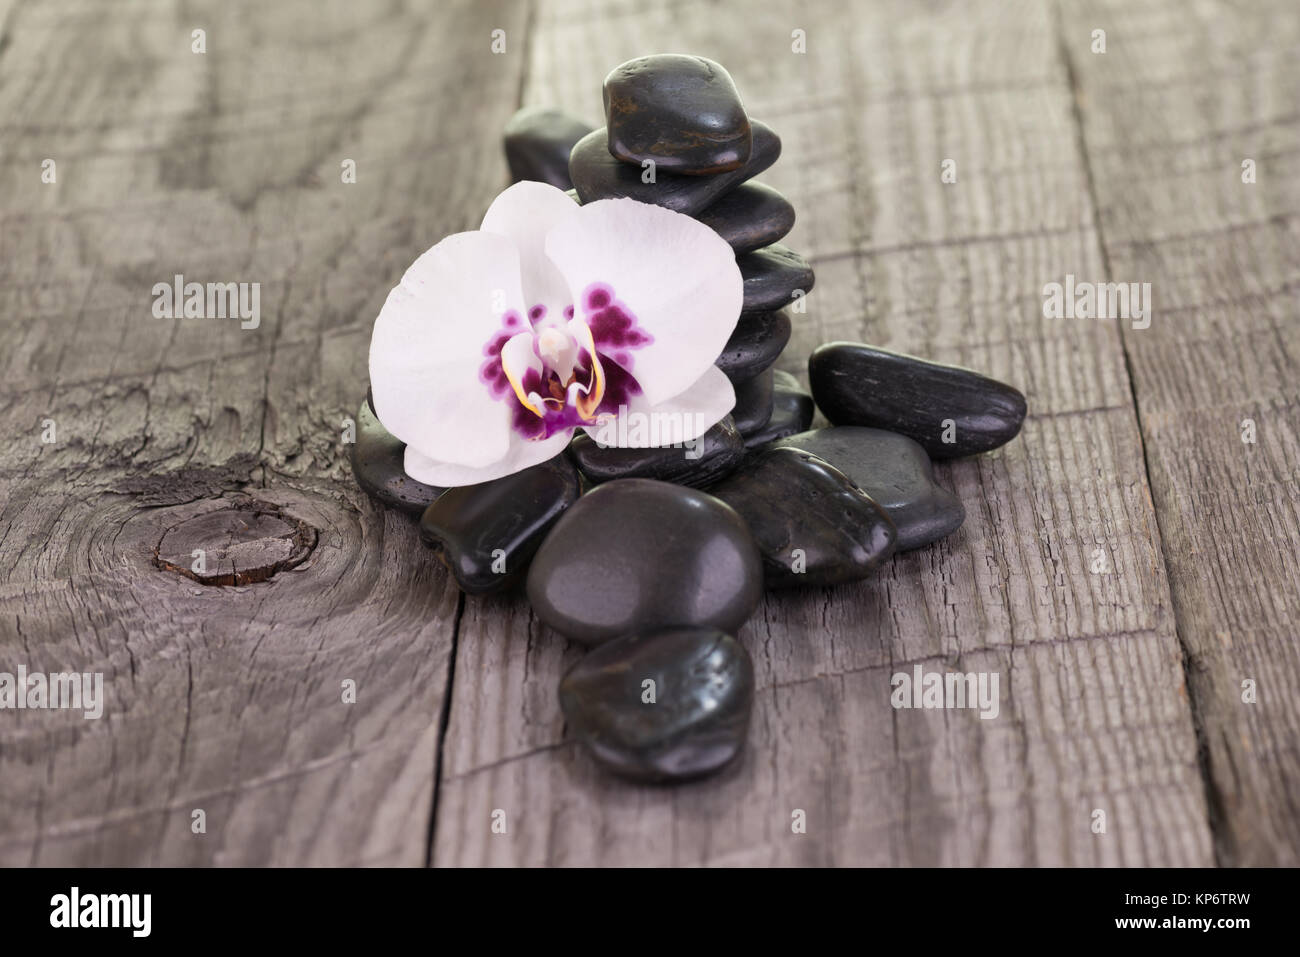 White Phalaenopsis orchid and black stones on wooden background Stock Photo